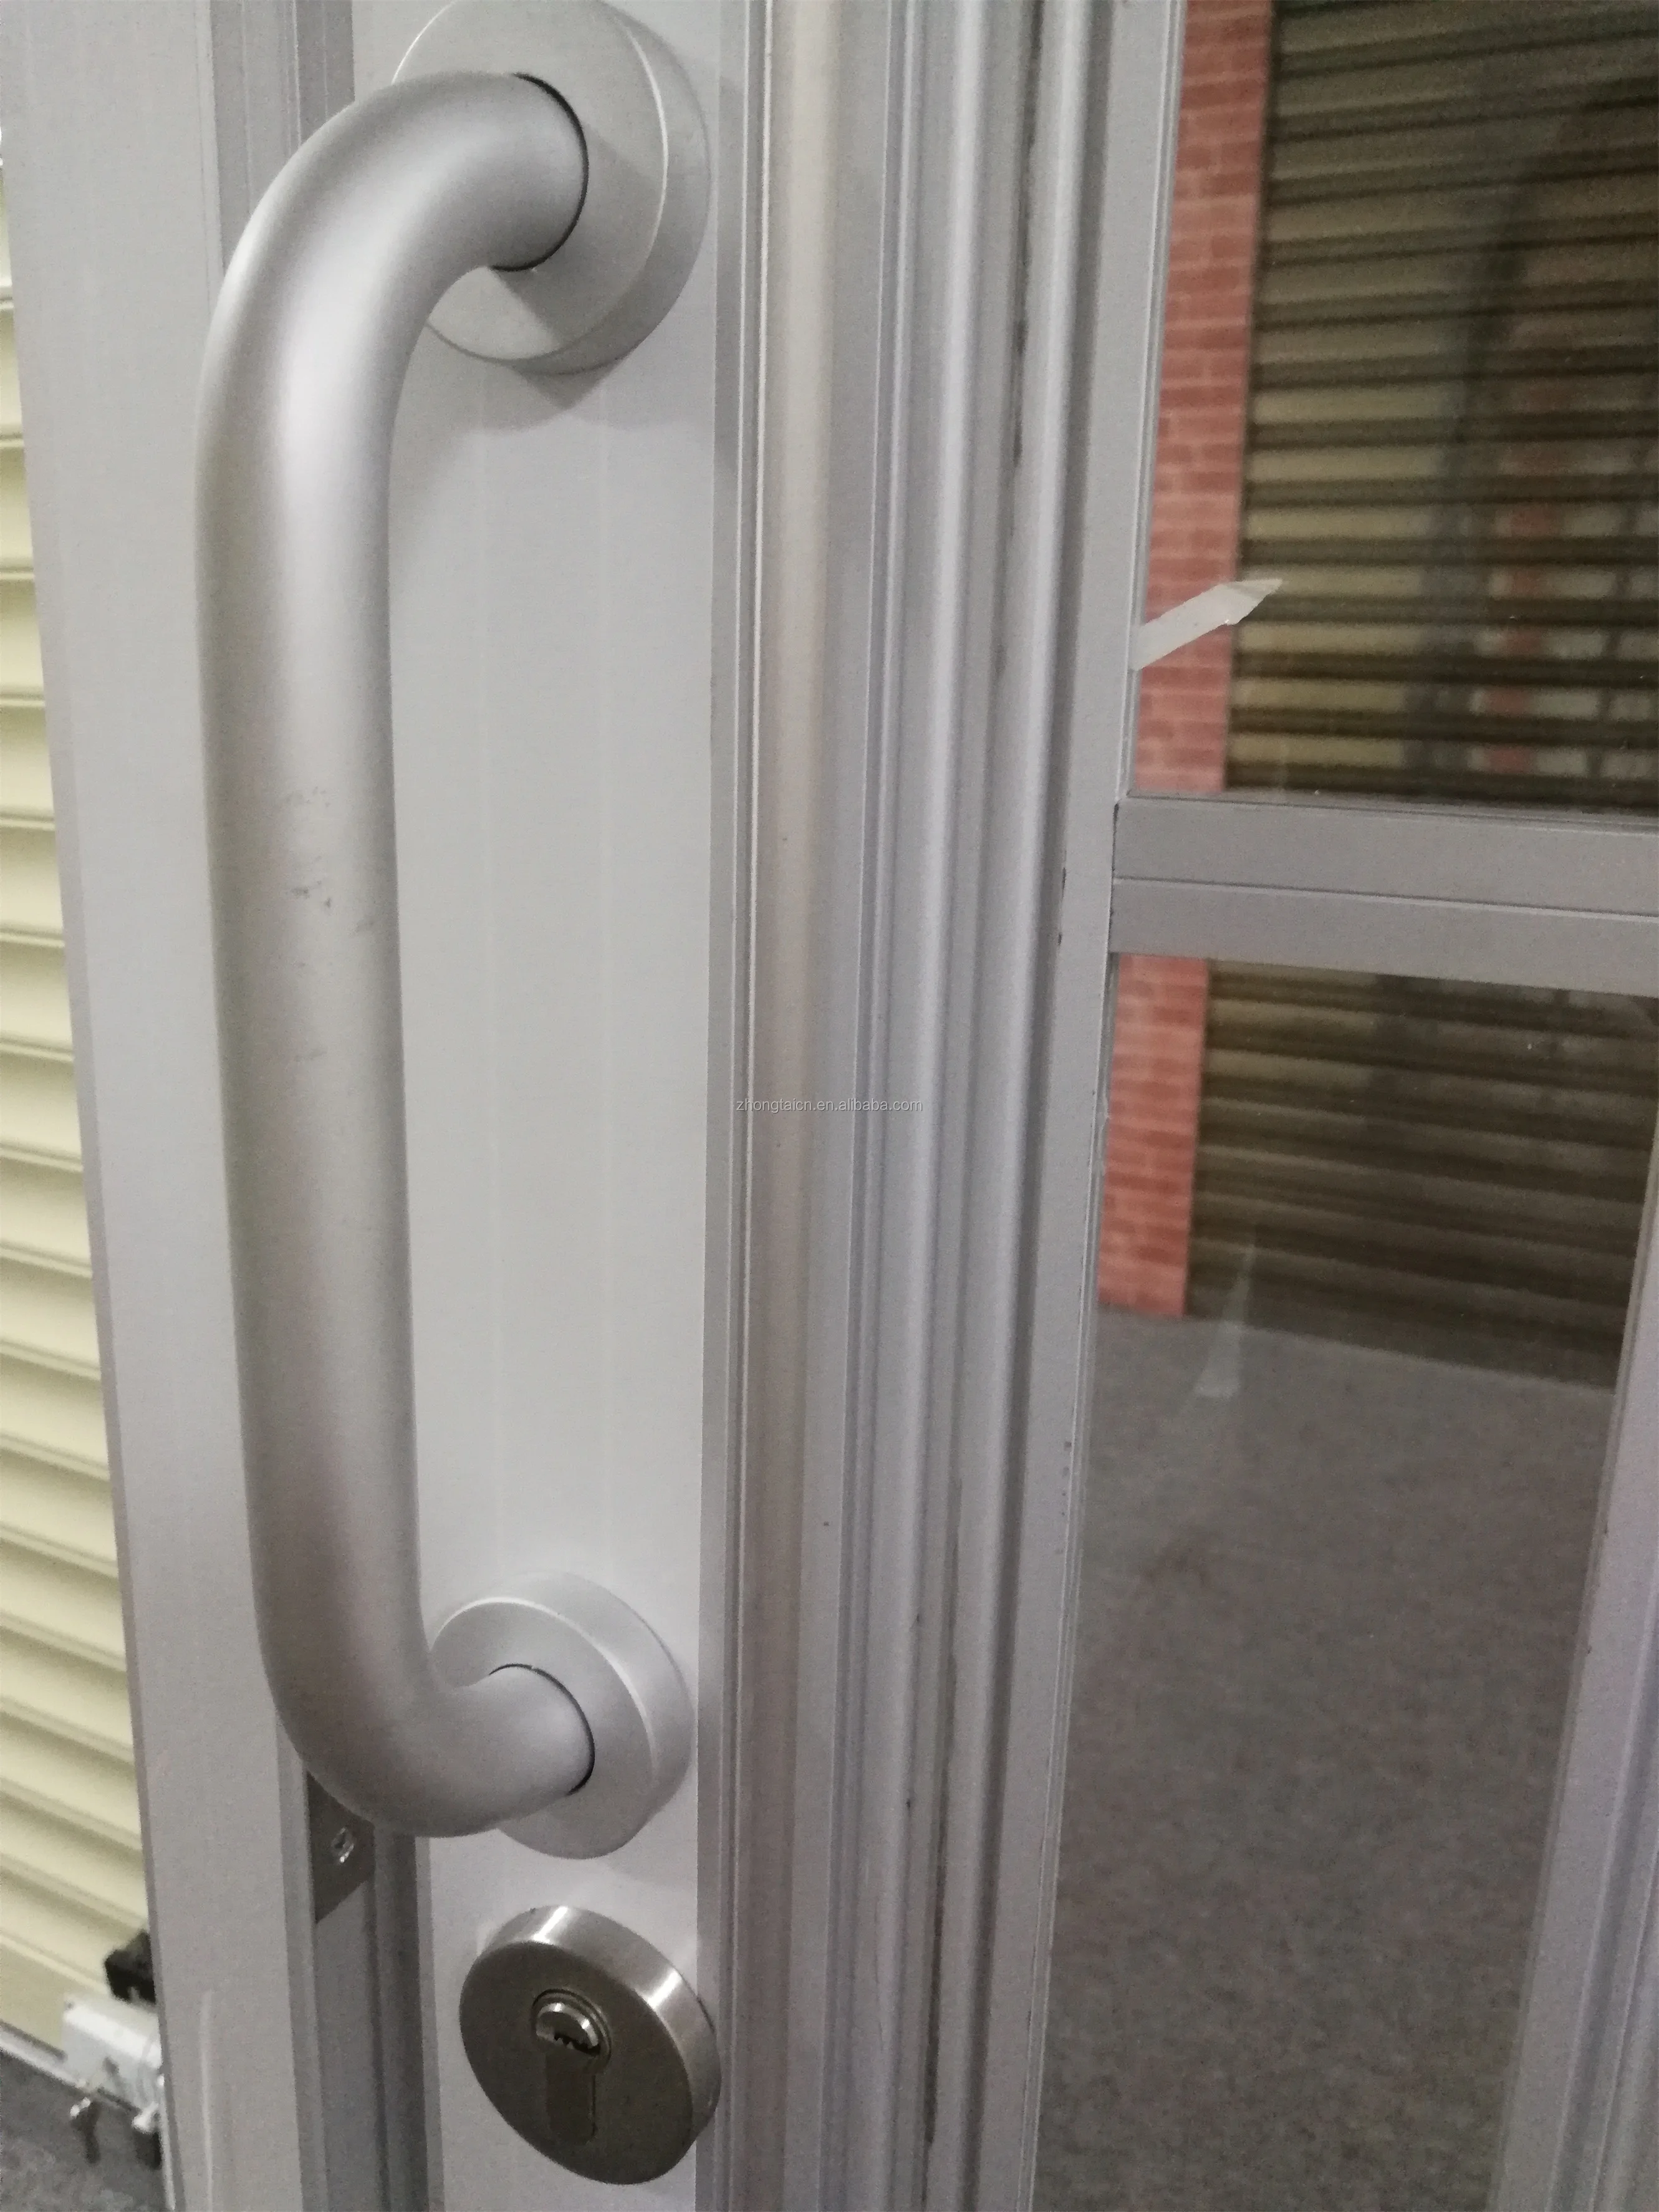 Excellent Quality Clear Horizontal Transparent Folding Door Free N95 Mask